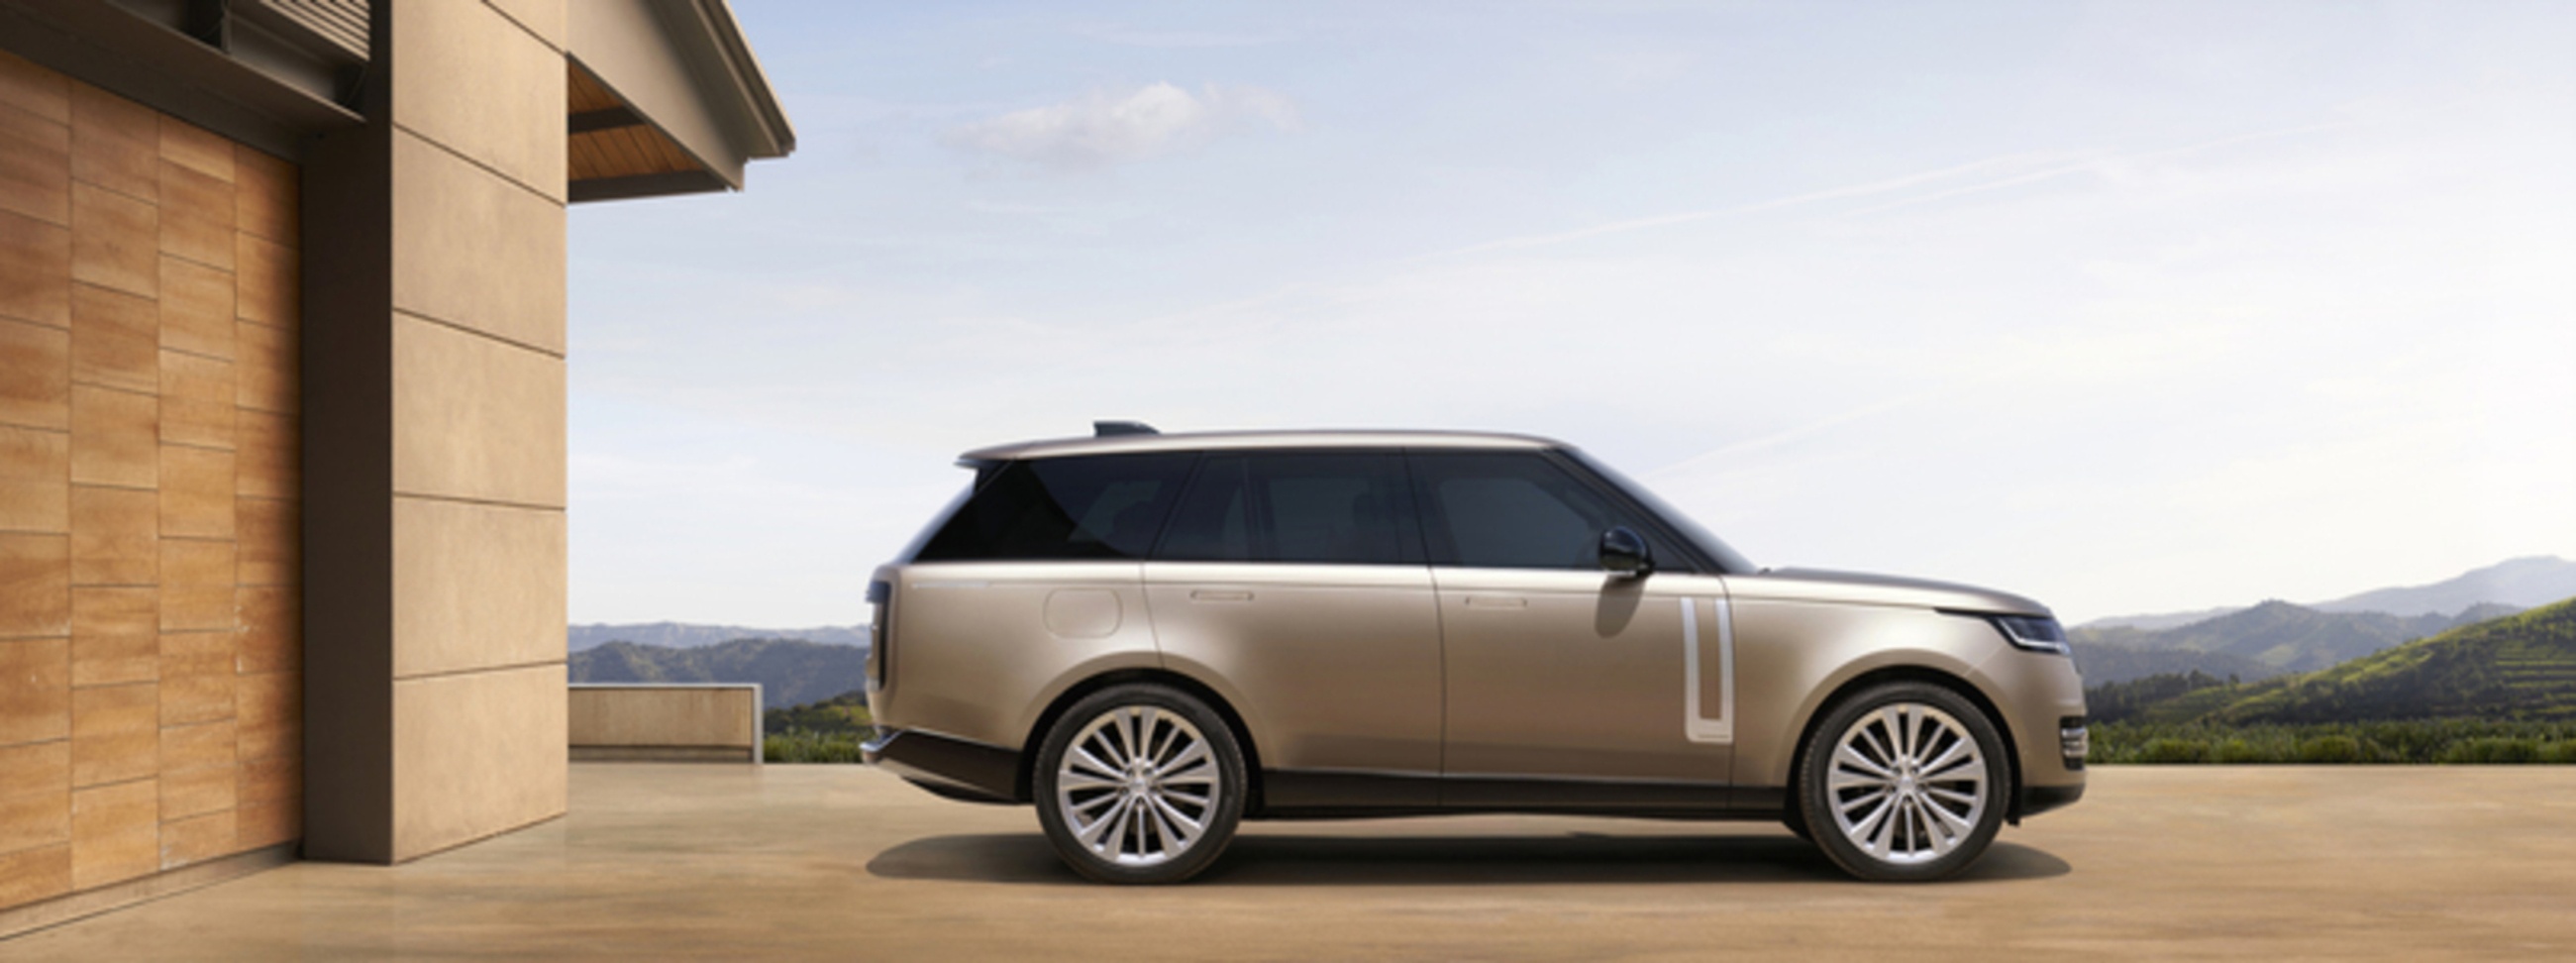 New range rover earns coveted production car of the year design award